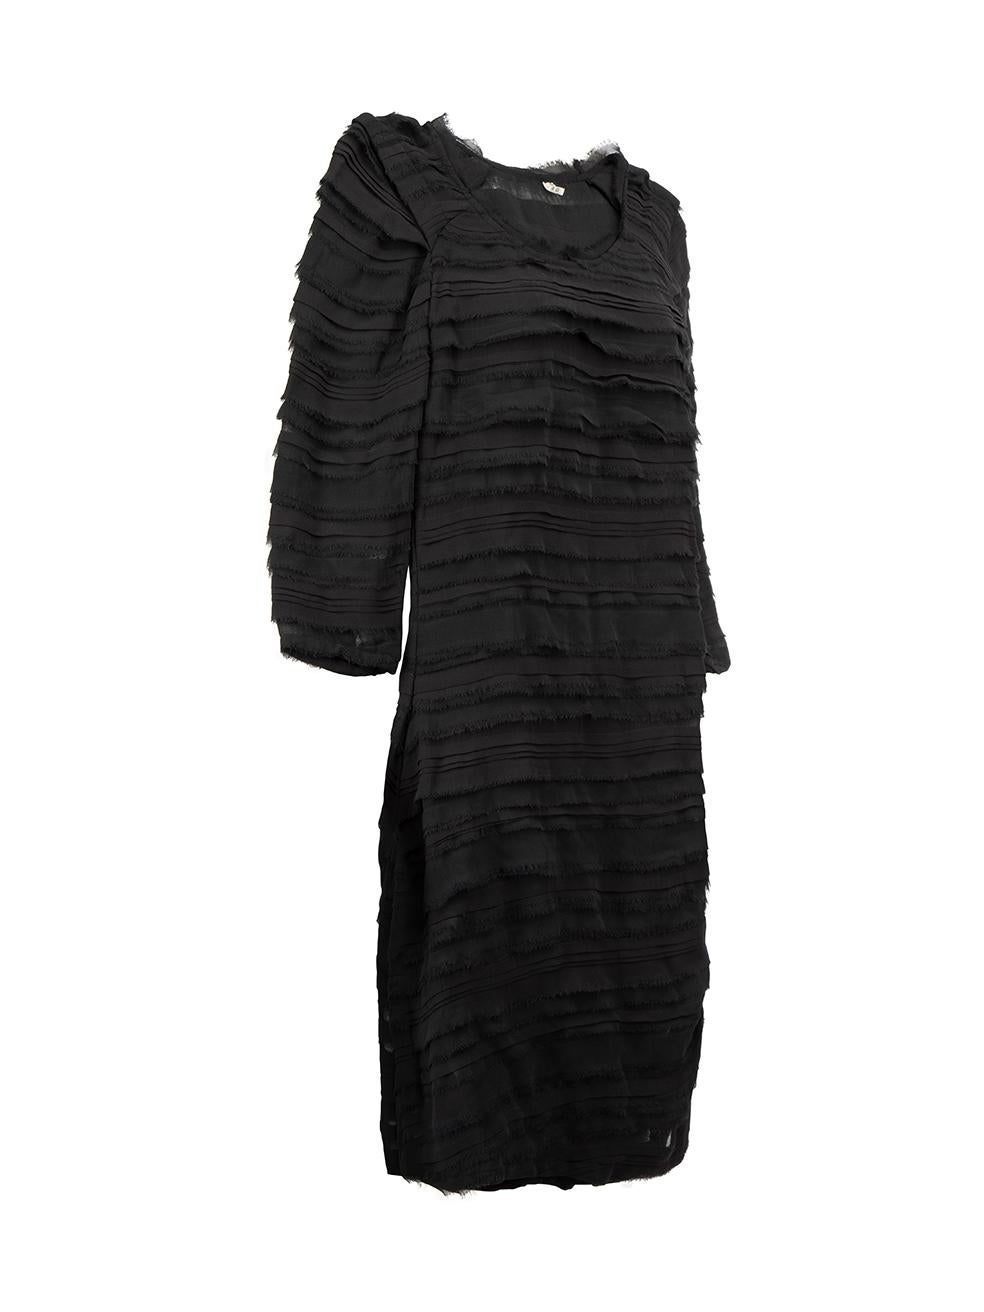 CONDITION is Very good. Hardly any visible wear to dress is evident on this used Iro designer resale item. 



Details


Black

Synthetic

Mini dress

Sheer- see through

Fray layered accent

Ruched detail on side





Composition

NO COMPOSITION